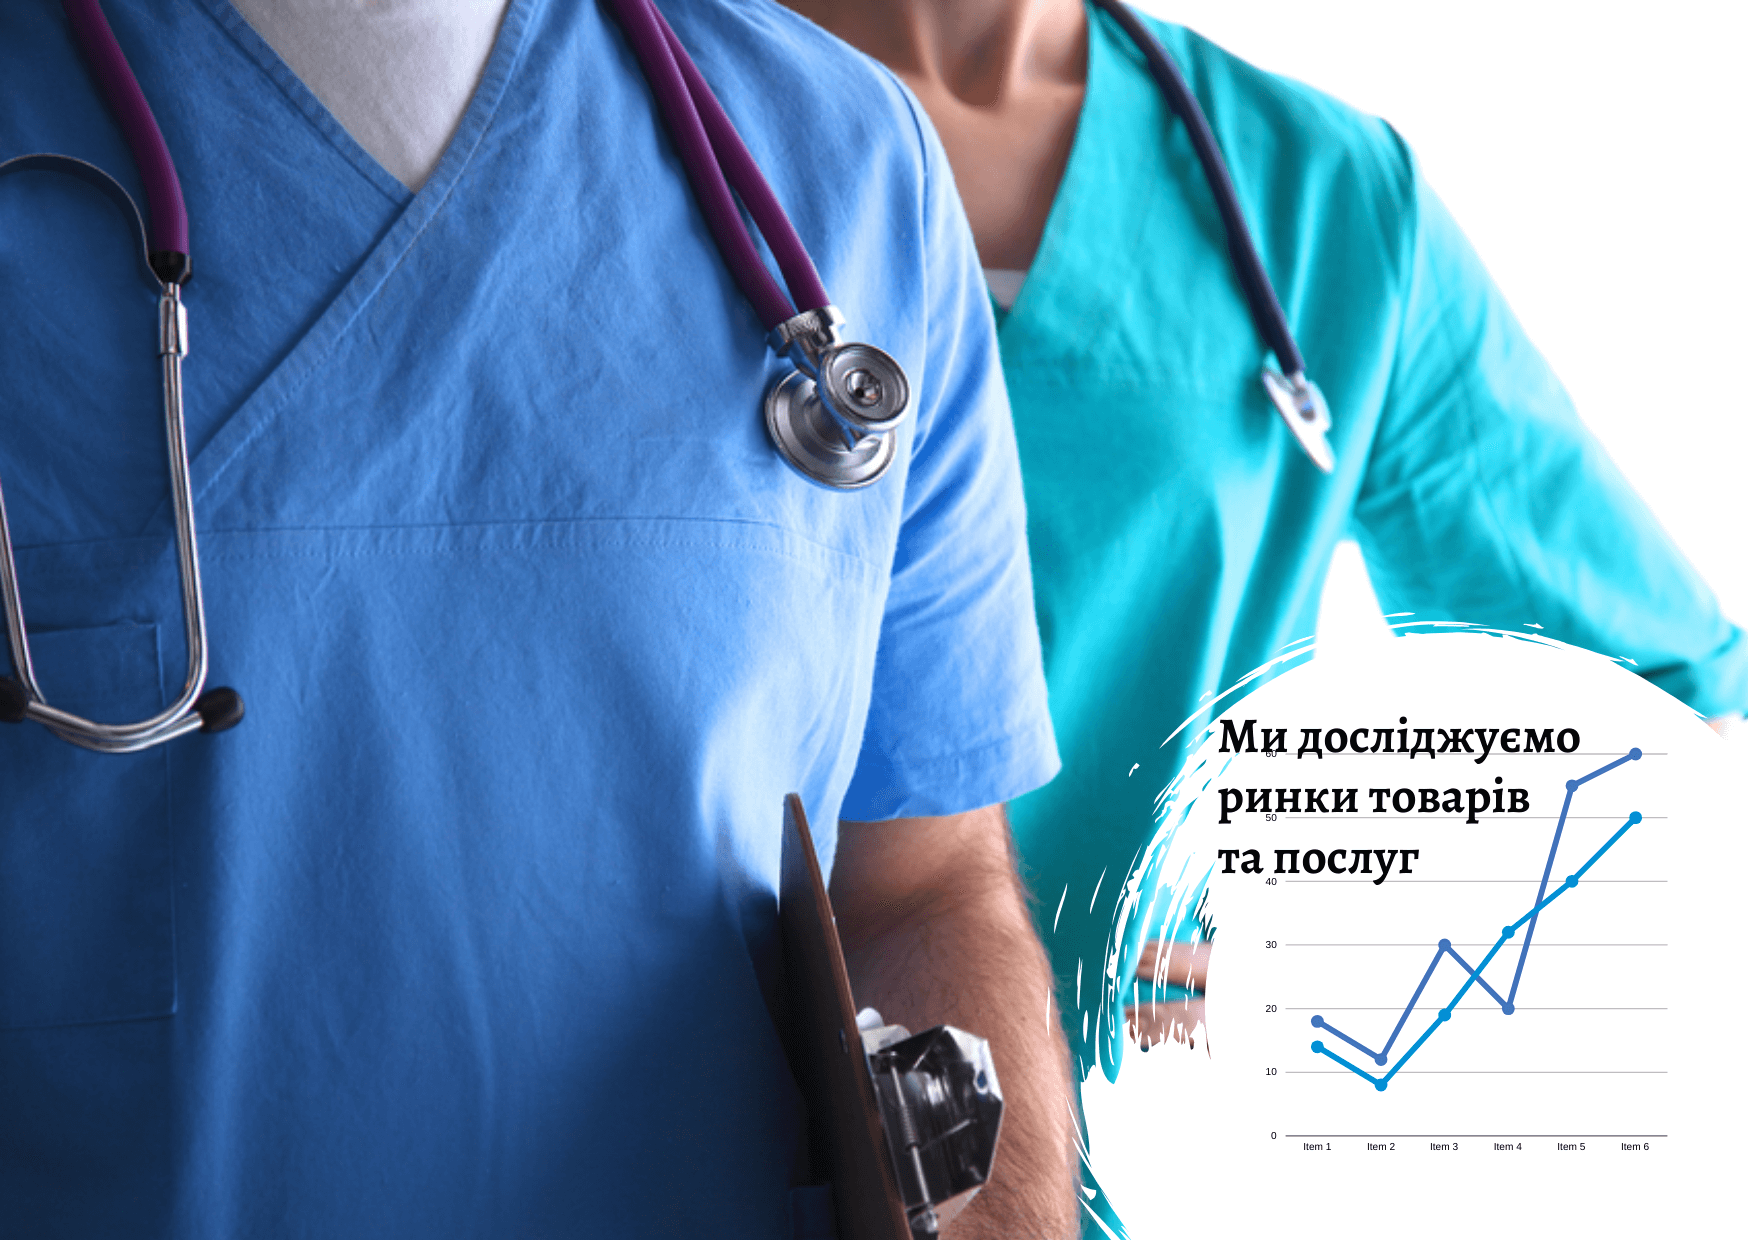 Ukrainian medical and industrial clothing market: restoration in war conditions 